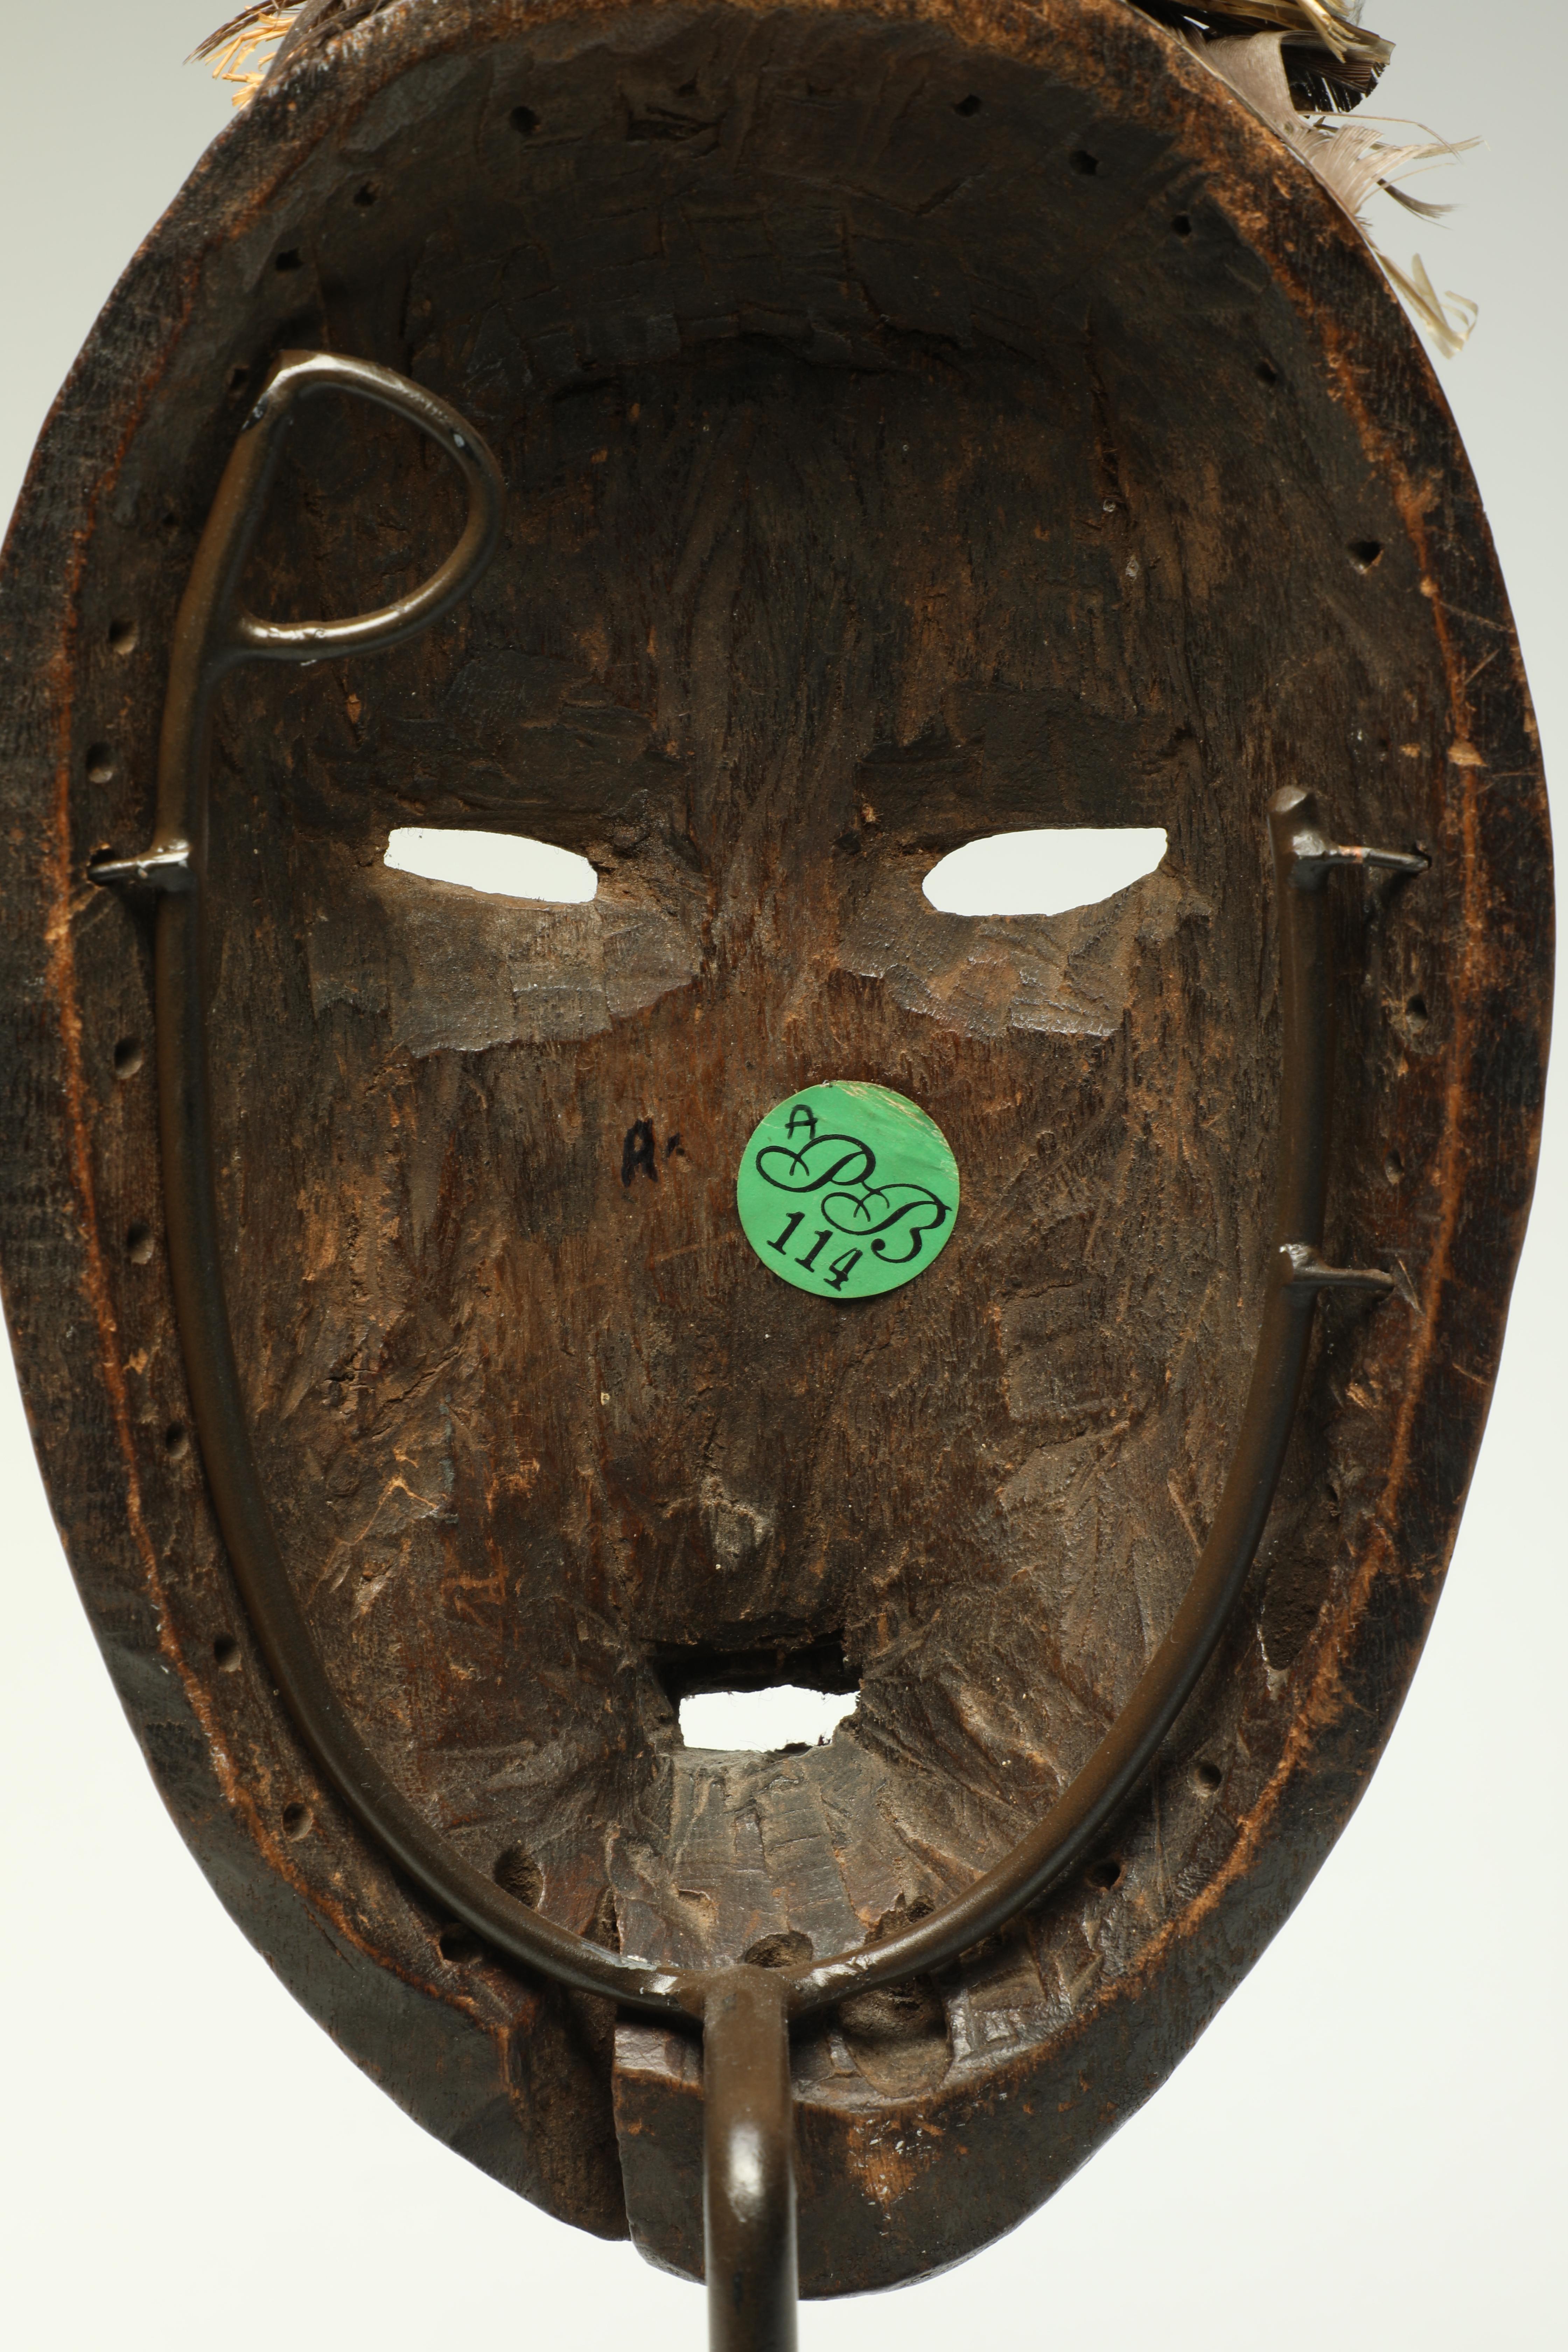 Wood Expressive Early Classic Cubist Dan Mask Early 20th Century Liberia, Africa For Sale